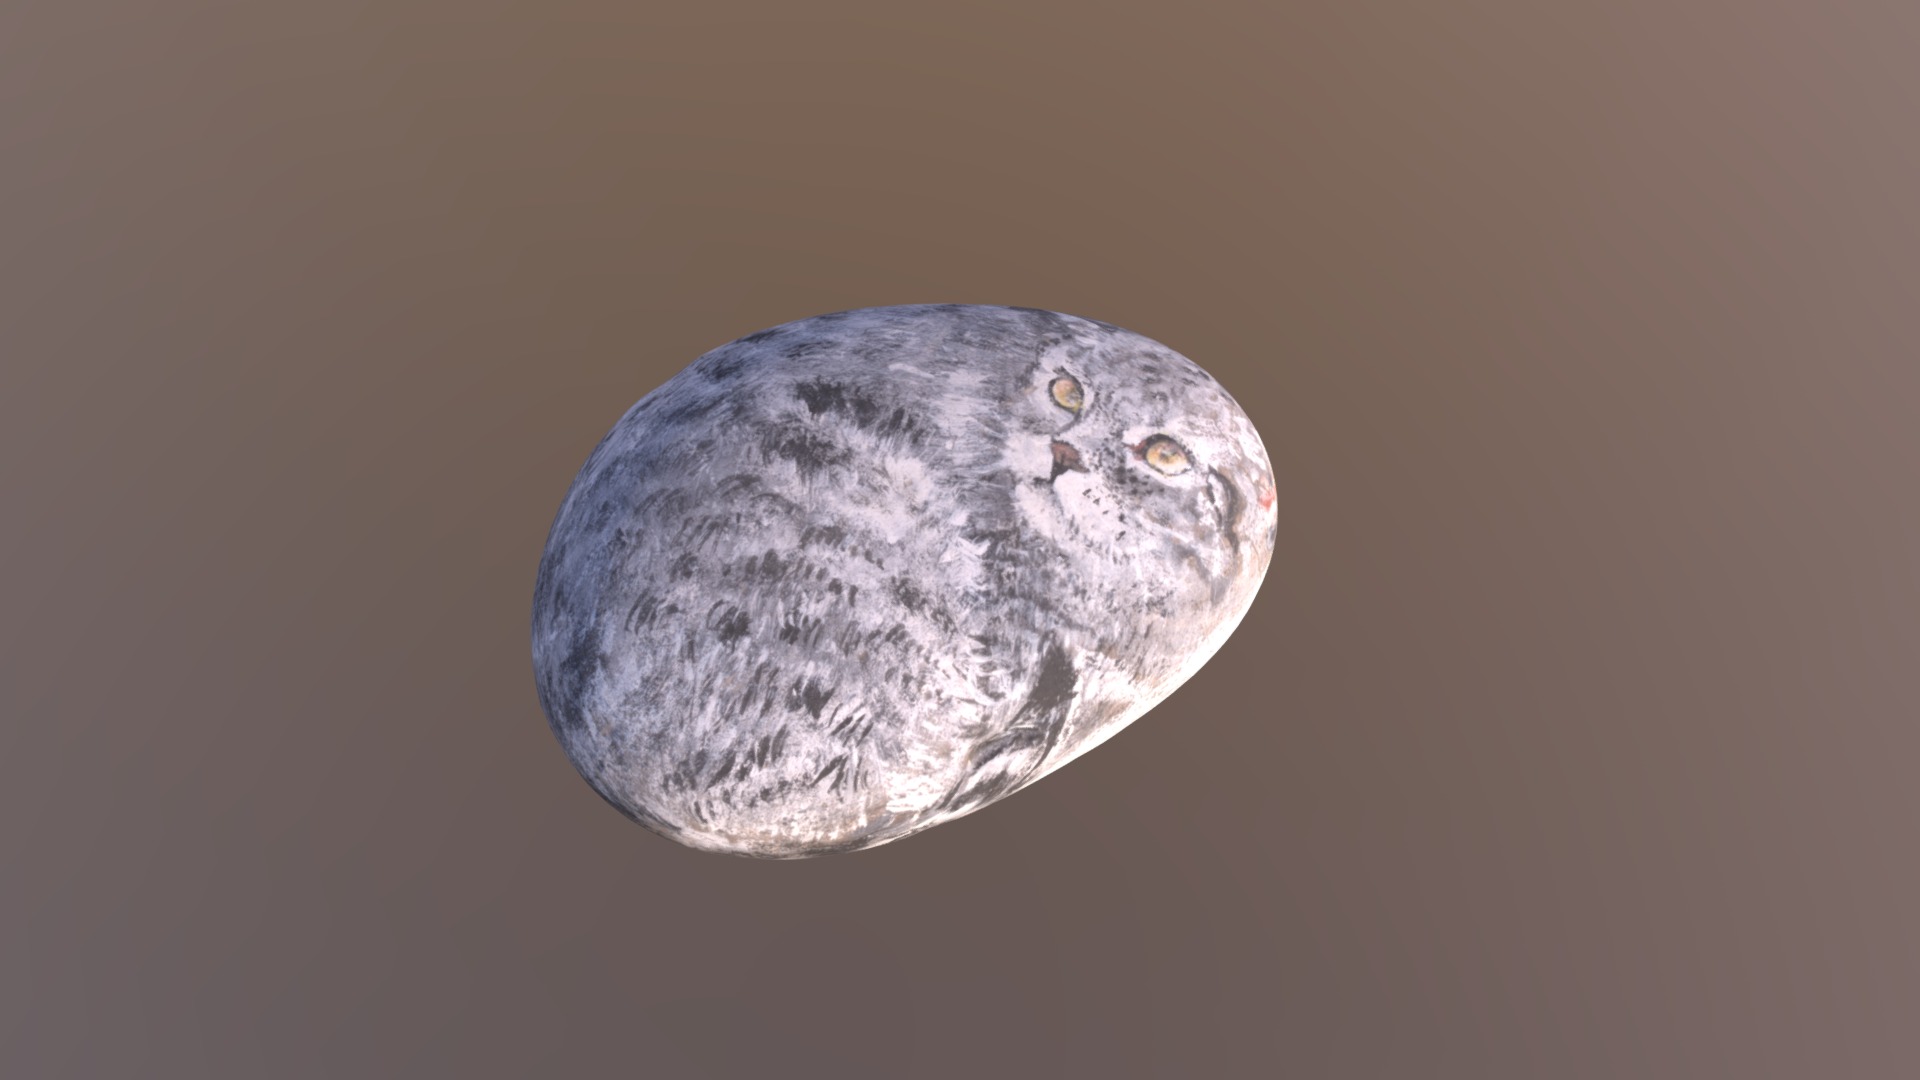 3D model Stone Painting Art – Cat3 - This is a 3D model of the Stone Painting Art - Cat3. The 3D model is about a grey owl with yellow eyes.